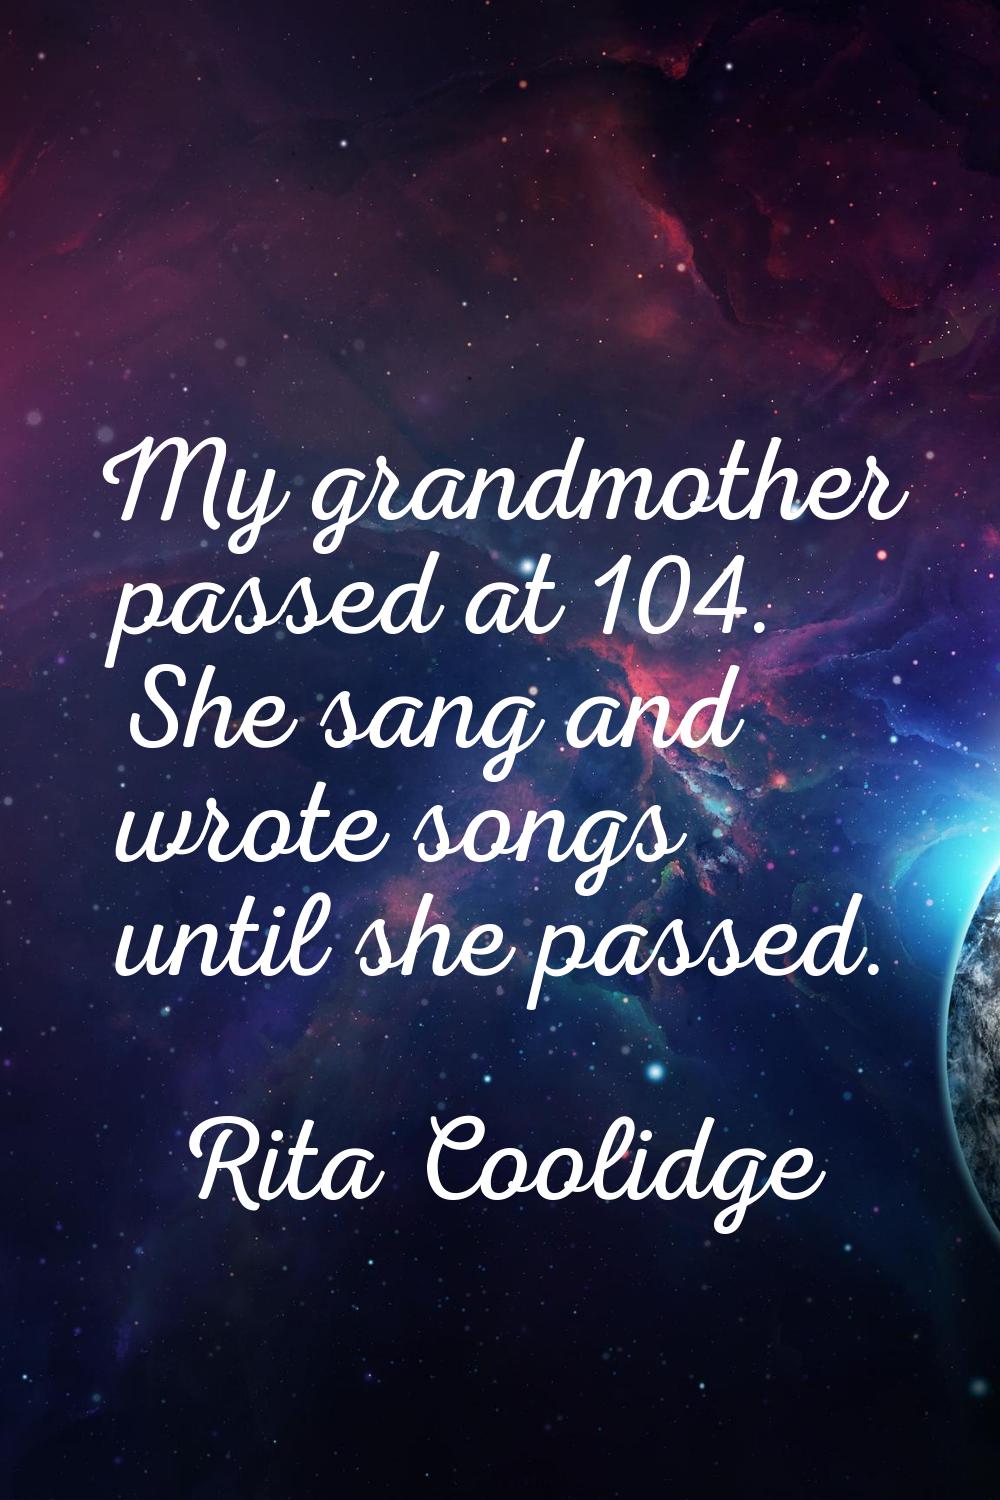 My grandmother passed at 104. She sang and wrote songs until she passed.